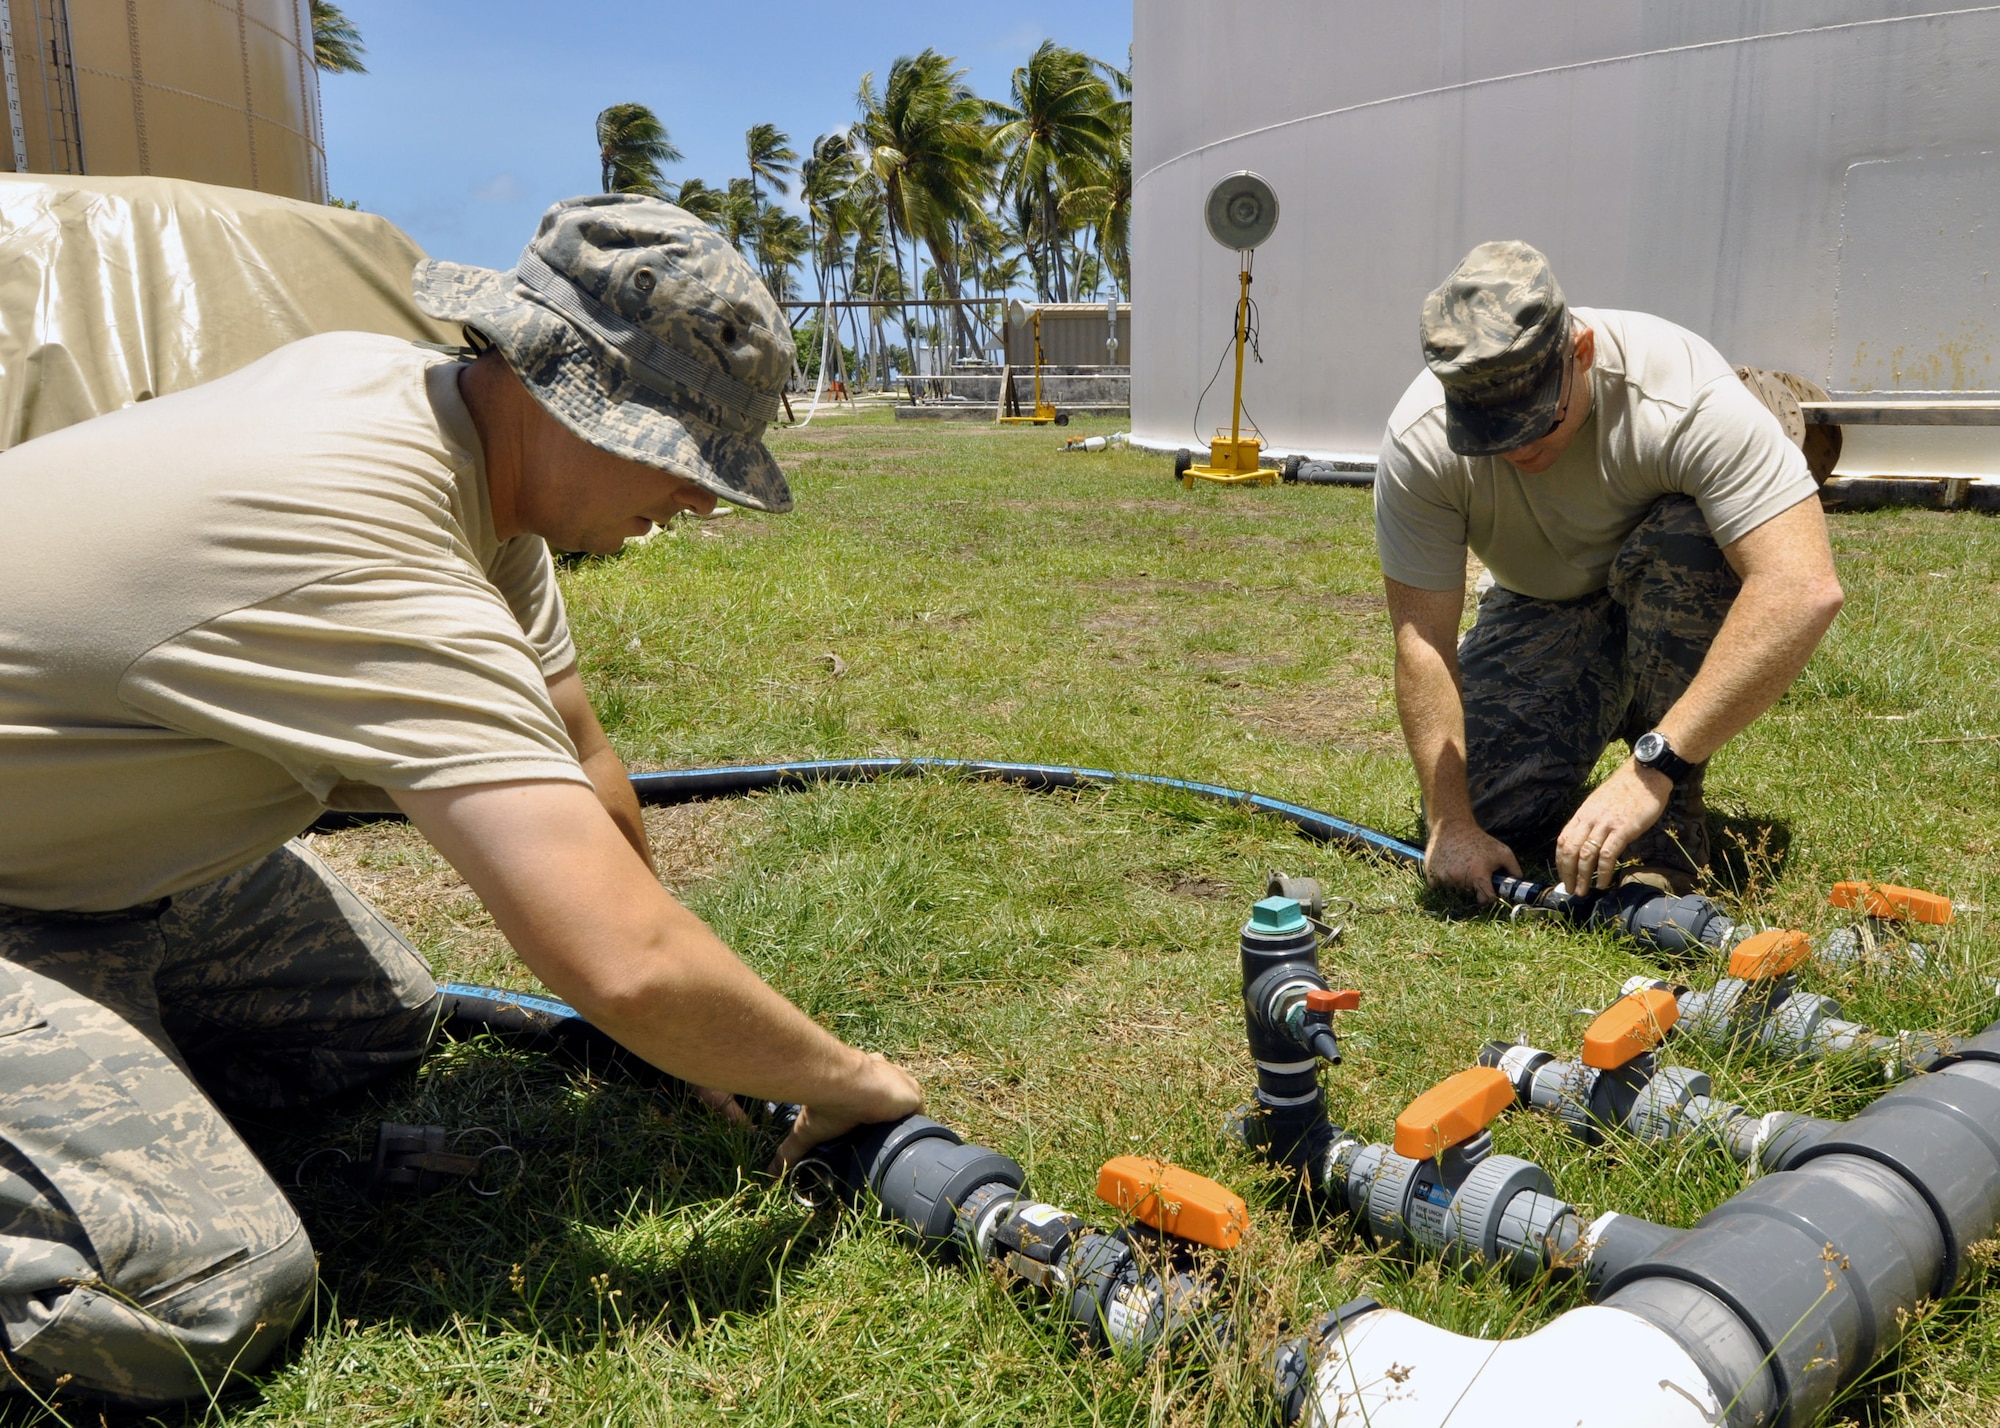 Civil engineer Airmen work to connect tubes to water tanks April 18 to replenish the water supply here that was ruined by unusually high tides in the early part of February at Roi-Namur in the Marshall Islands. The Airmen have treated more than 1,840,000 gallons of water since their arrival. (U.S. Air Force photo/Tech. Sgt. Cohen A. Young) 
